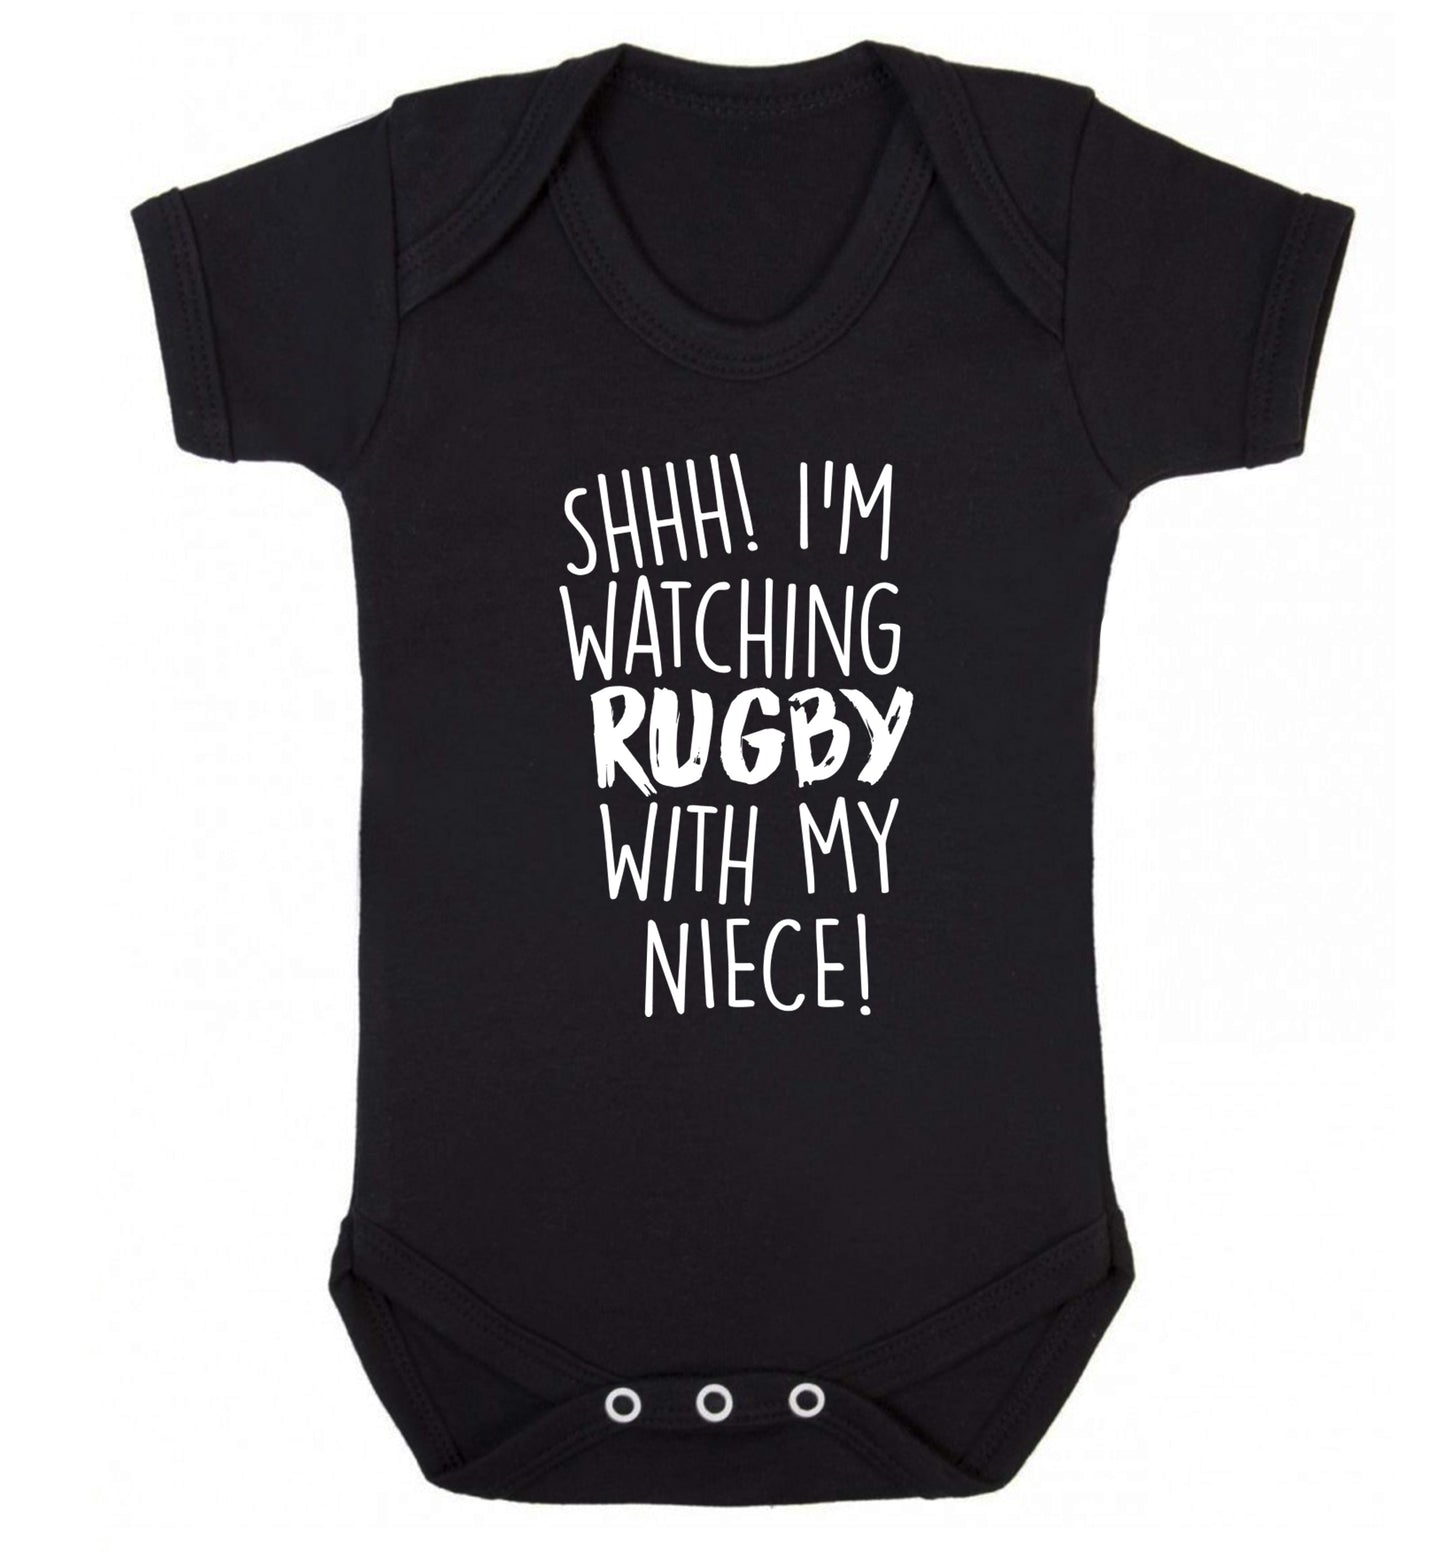 Shh.. I'm watching rugby with my niece Baby Vest black 18-24 months